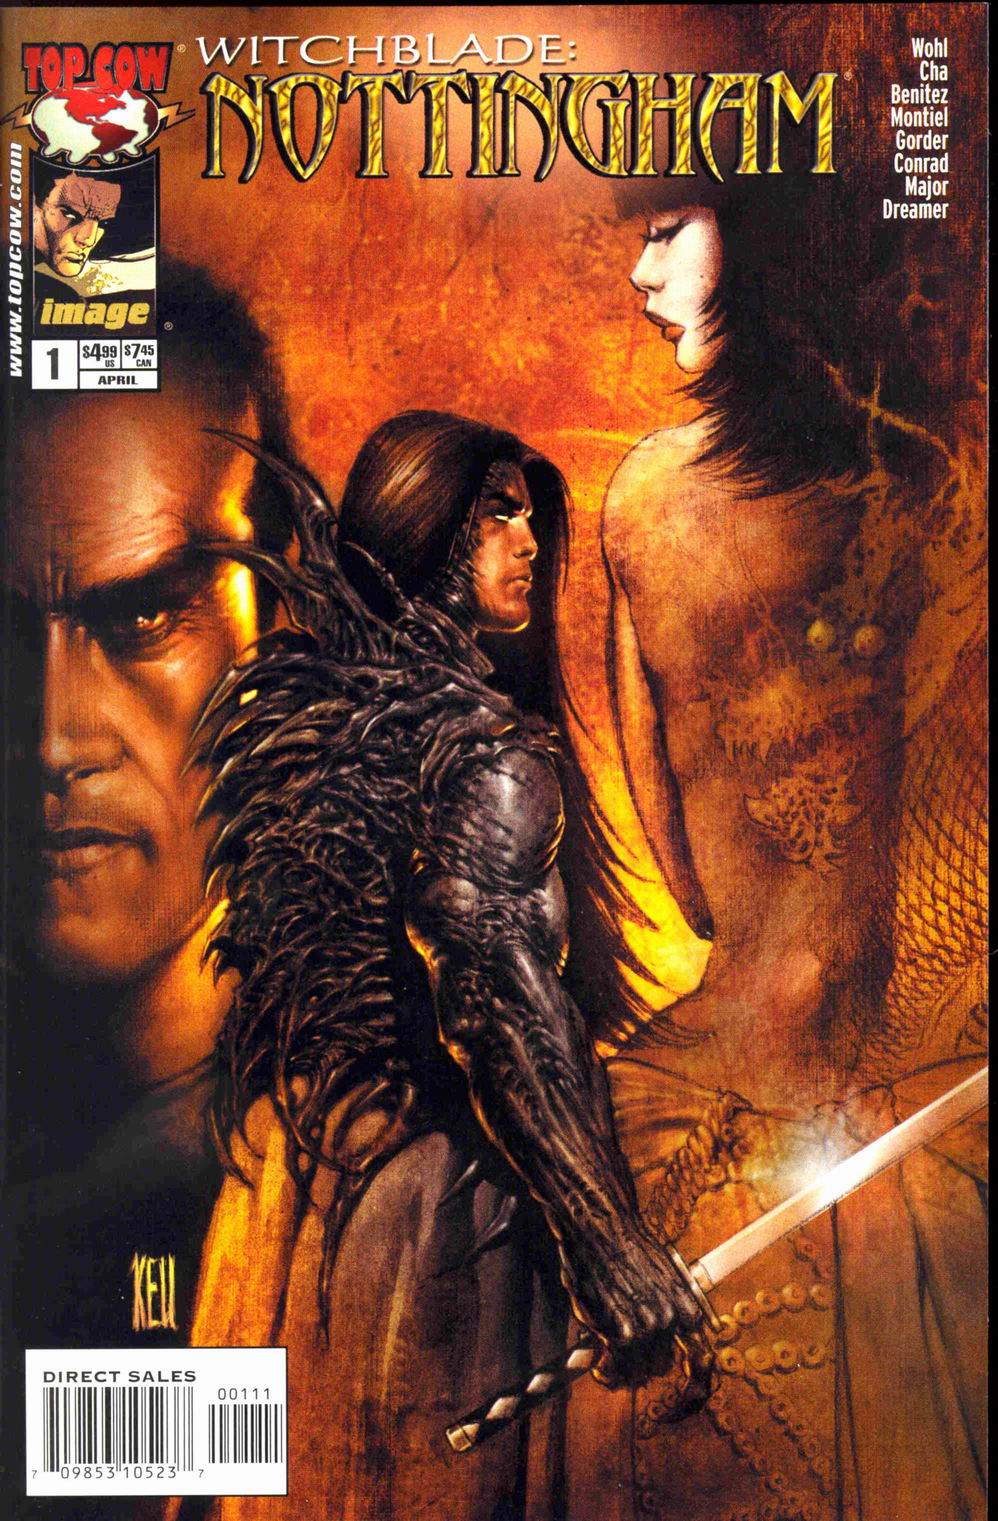 Read online Witchblade: Nottingham comic -  Issue # Full - 1